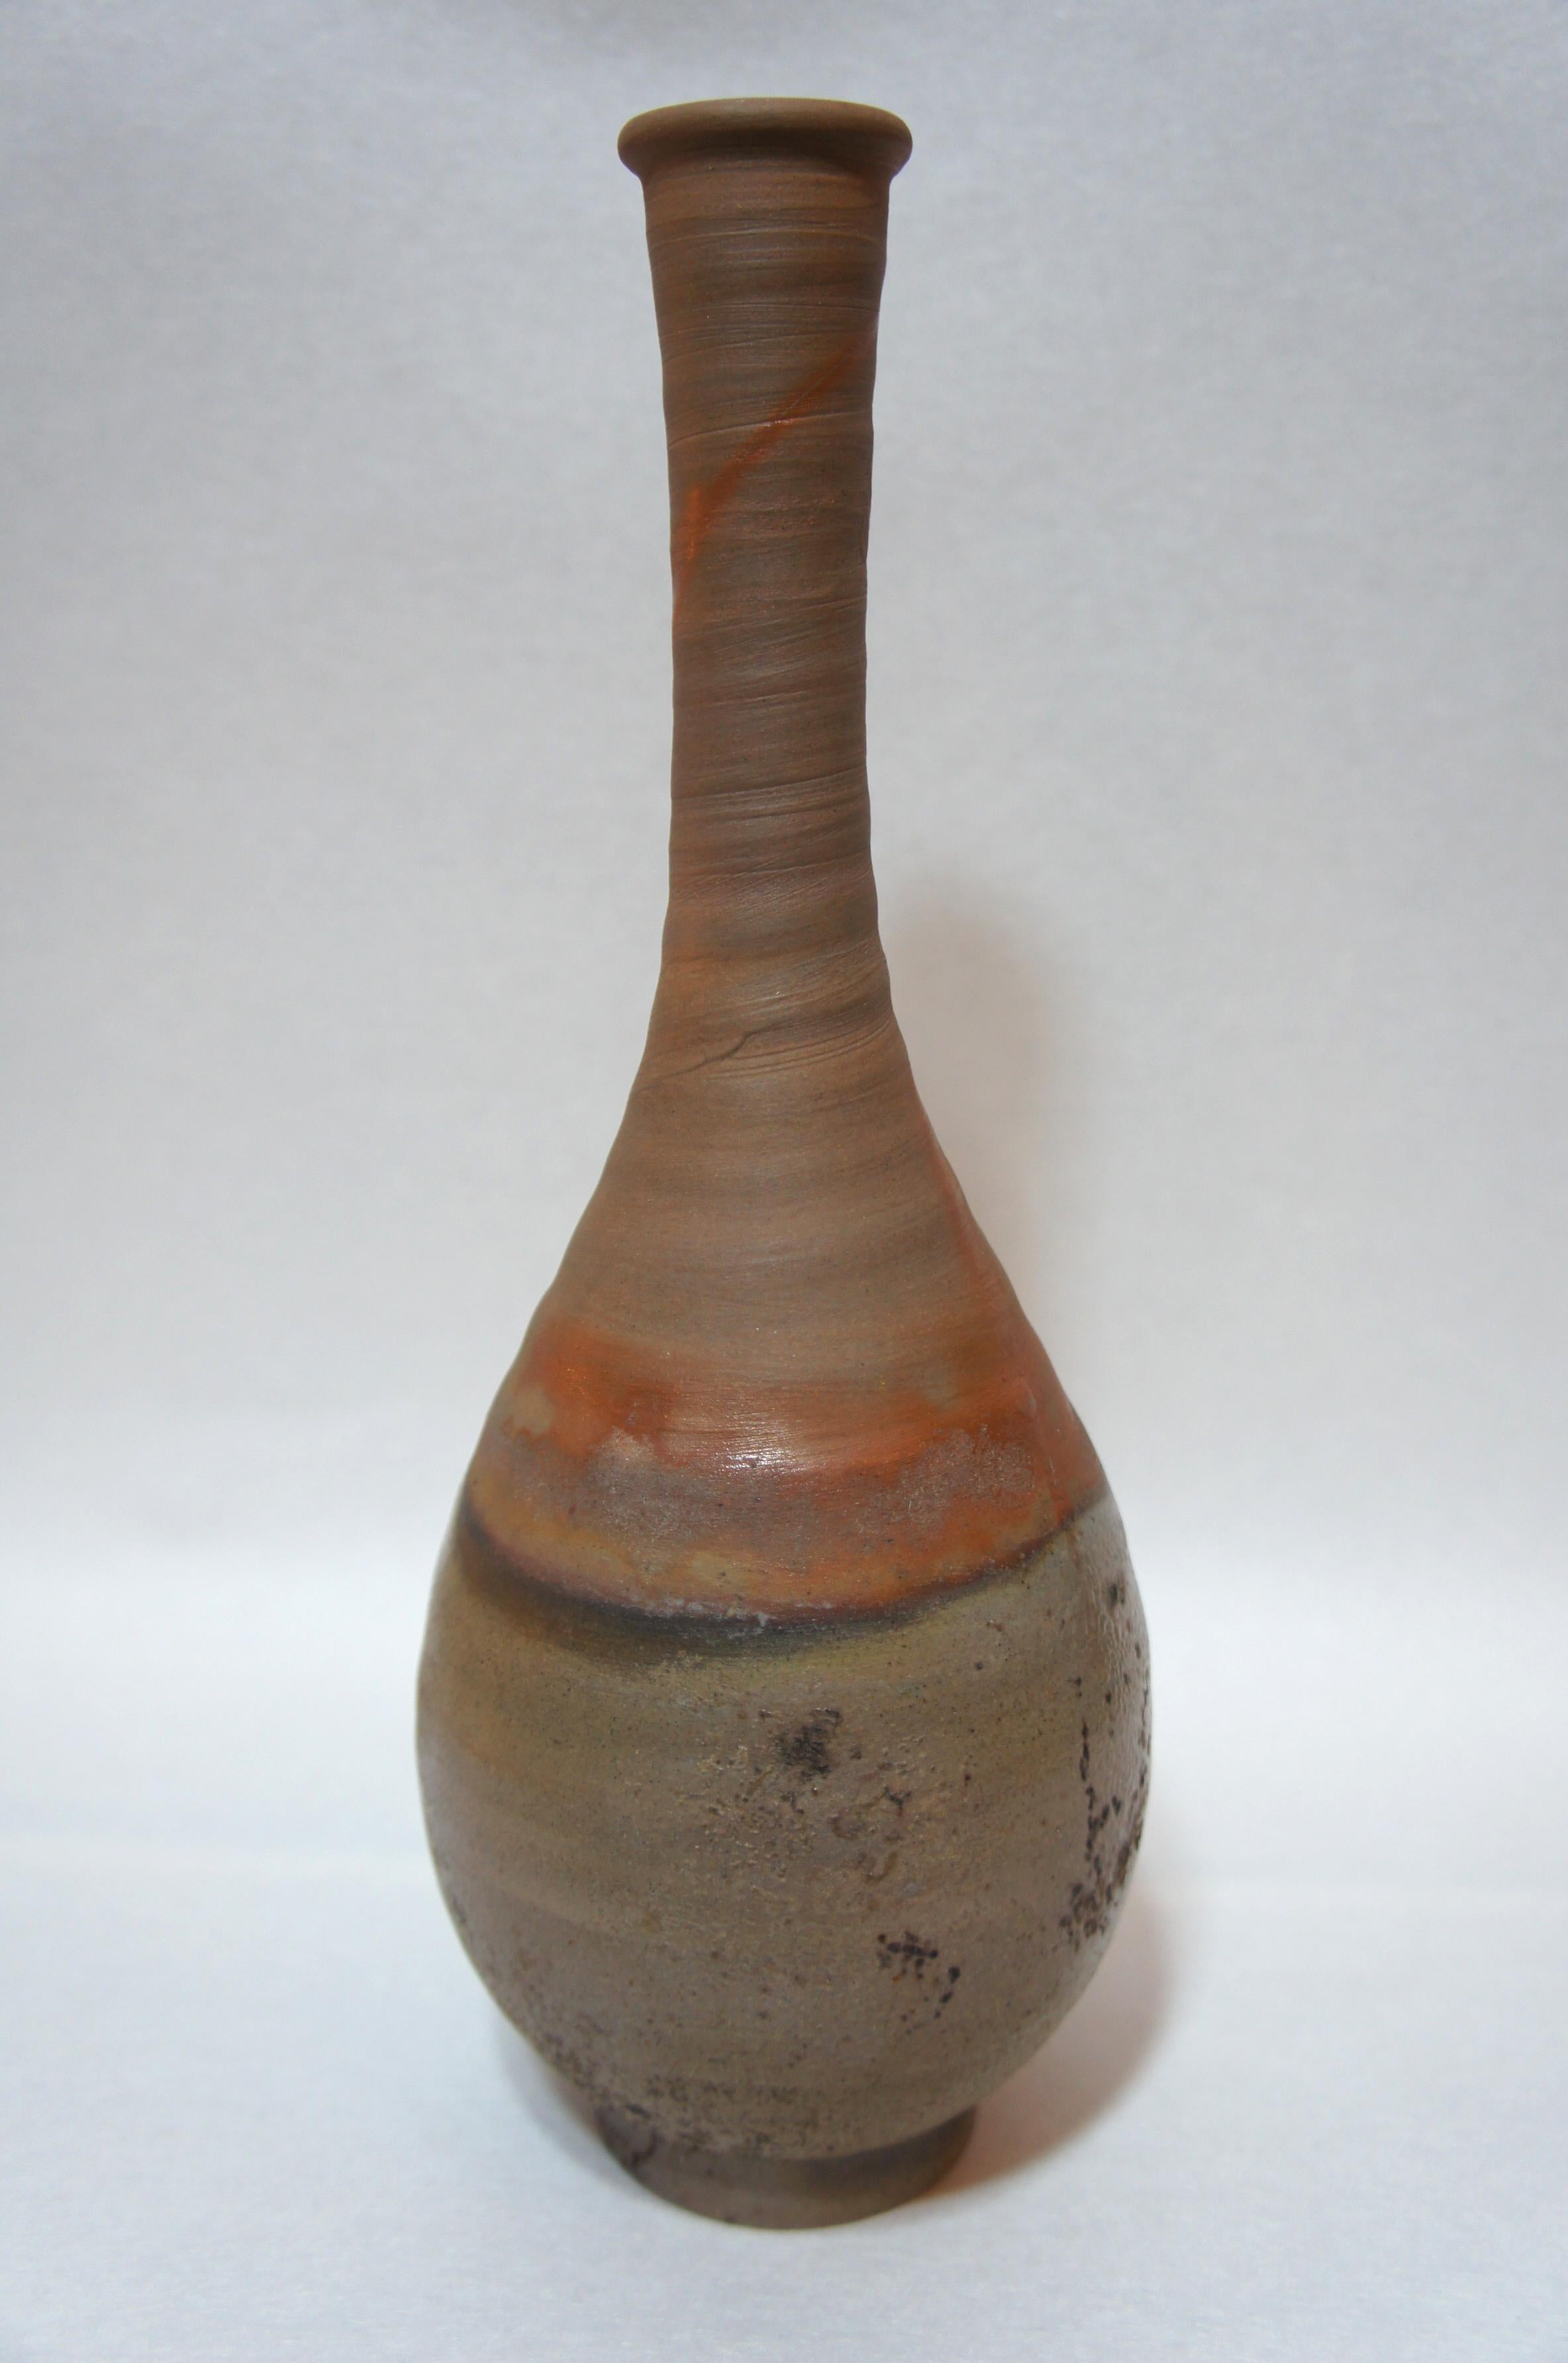 Beautiful brown and orange unglazed Bizen ware vase.
On the bottom side, there is a sign of a Japanese artisan.

Bizen Ware is pottery and tunnel kiln made in Bizen province, presently part of Okayama prefecture in Japan. The kiln is one of the